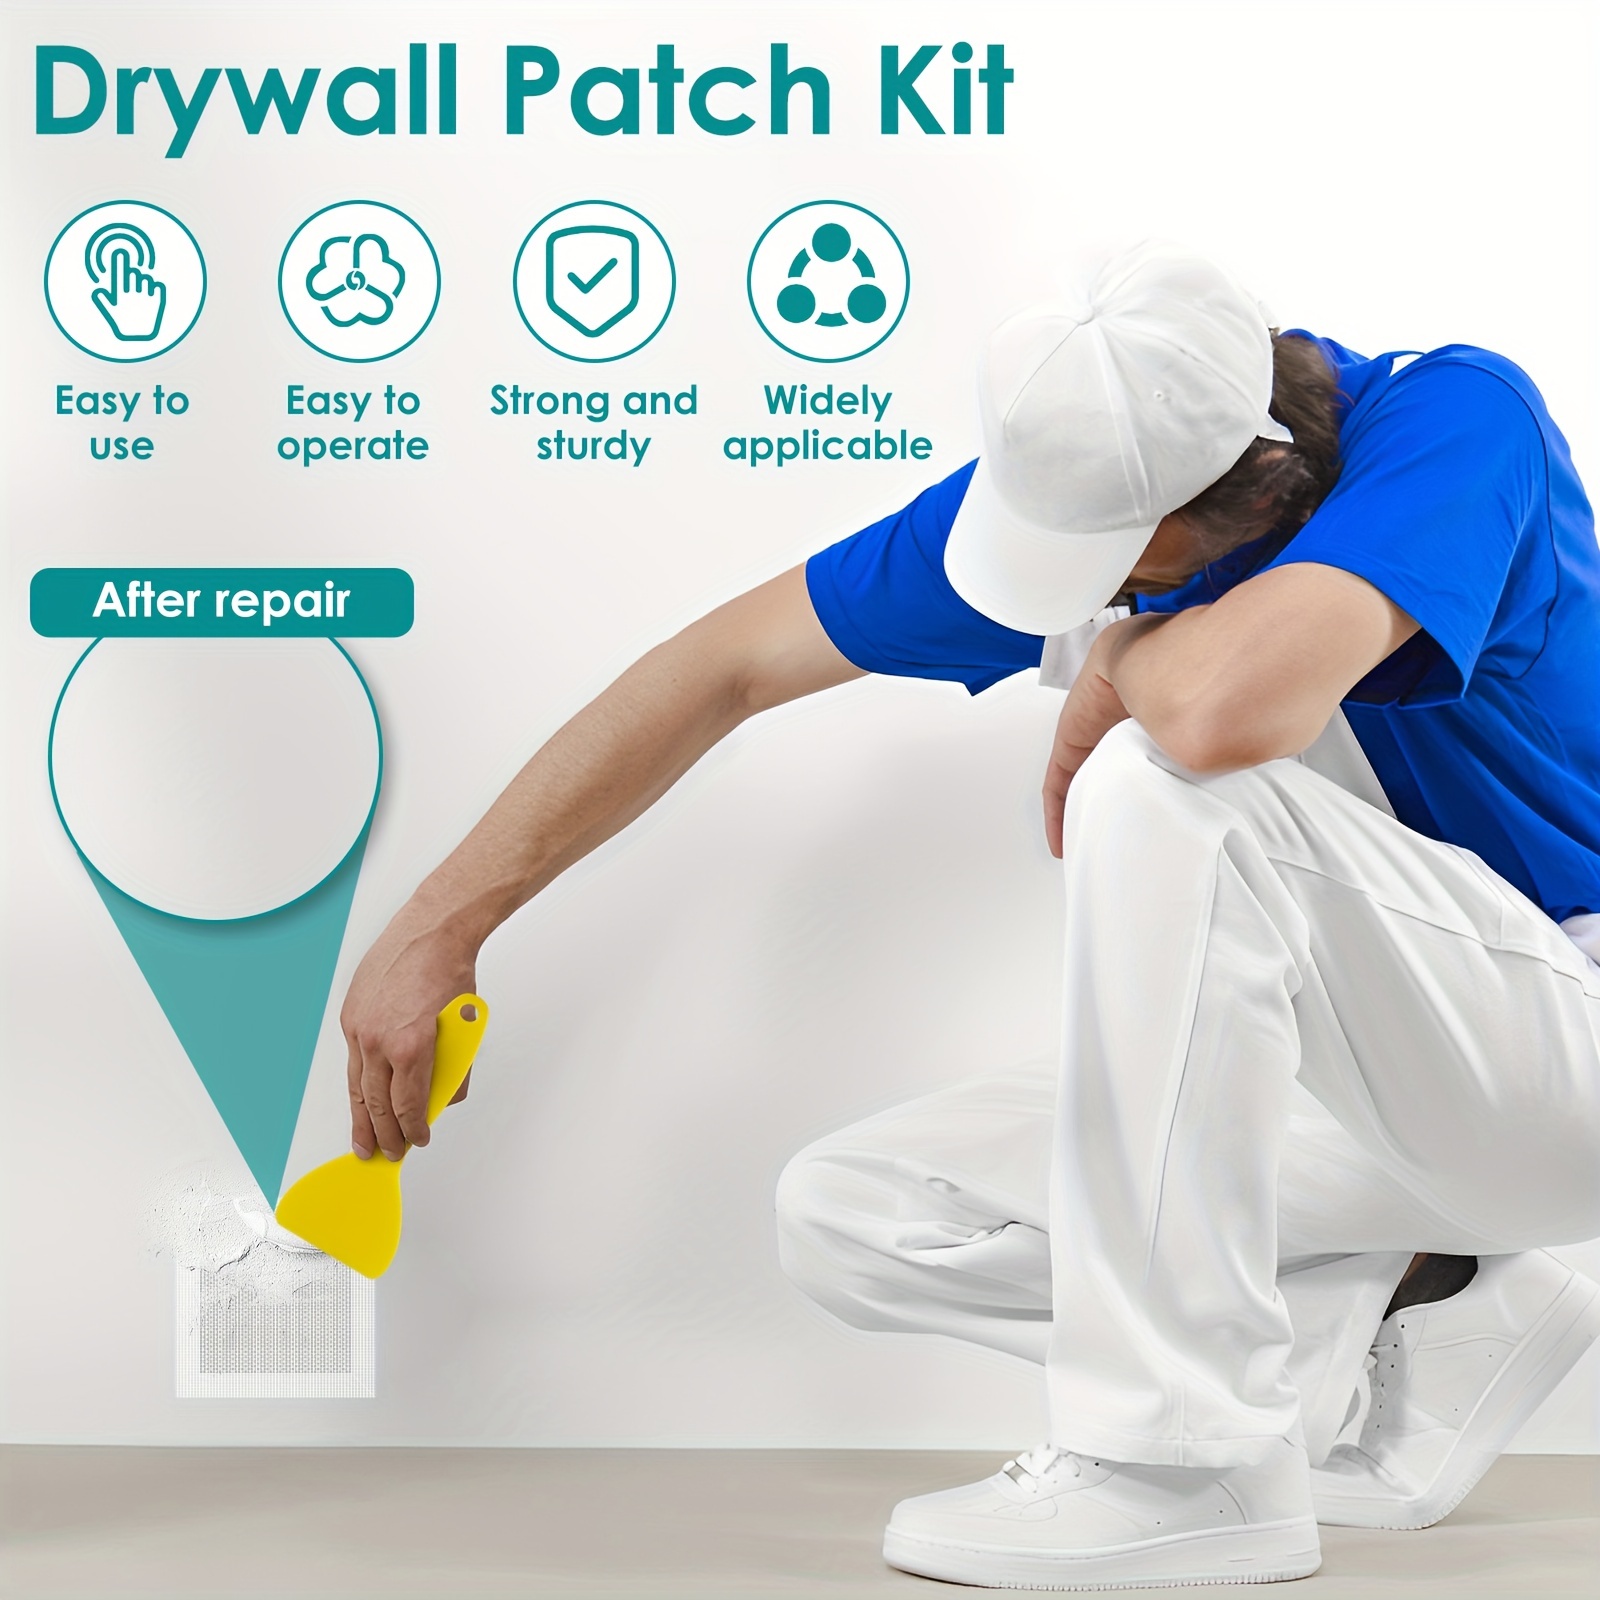 10pcs/set Wall Patch Repair Kit, Drywall Repair Patch Tools, Self Adhesive  Fiber Mesh Patch For Fill Wall Hole Ceilings Drywall Plasterboard, With Scr